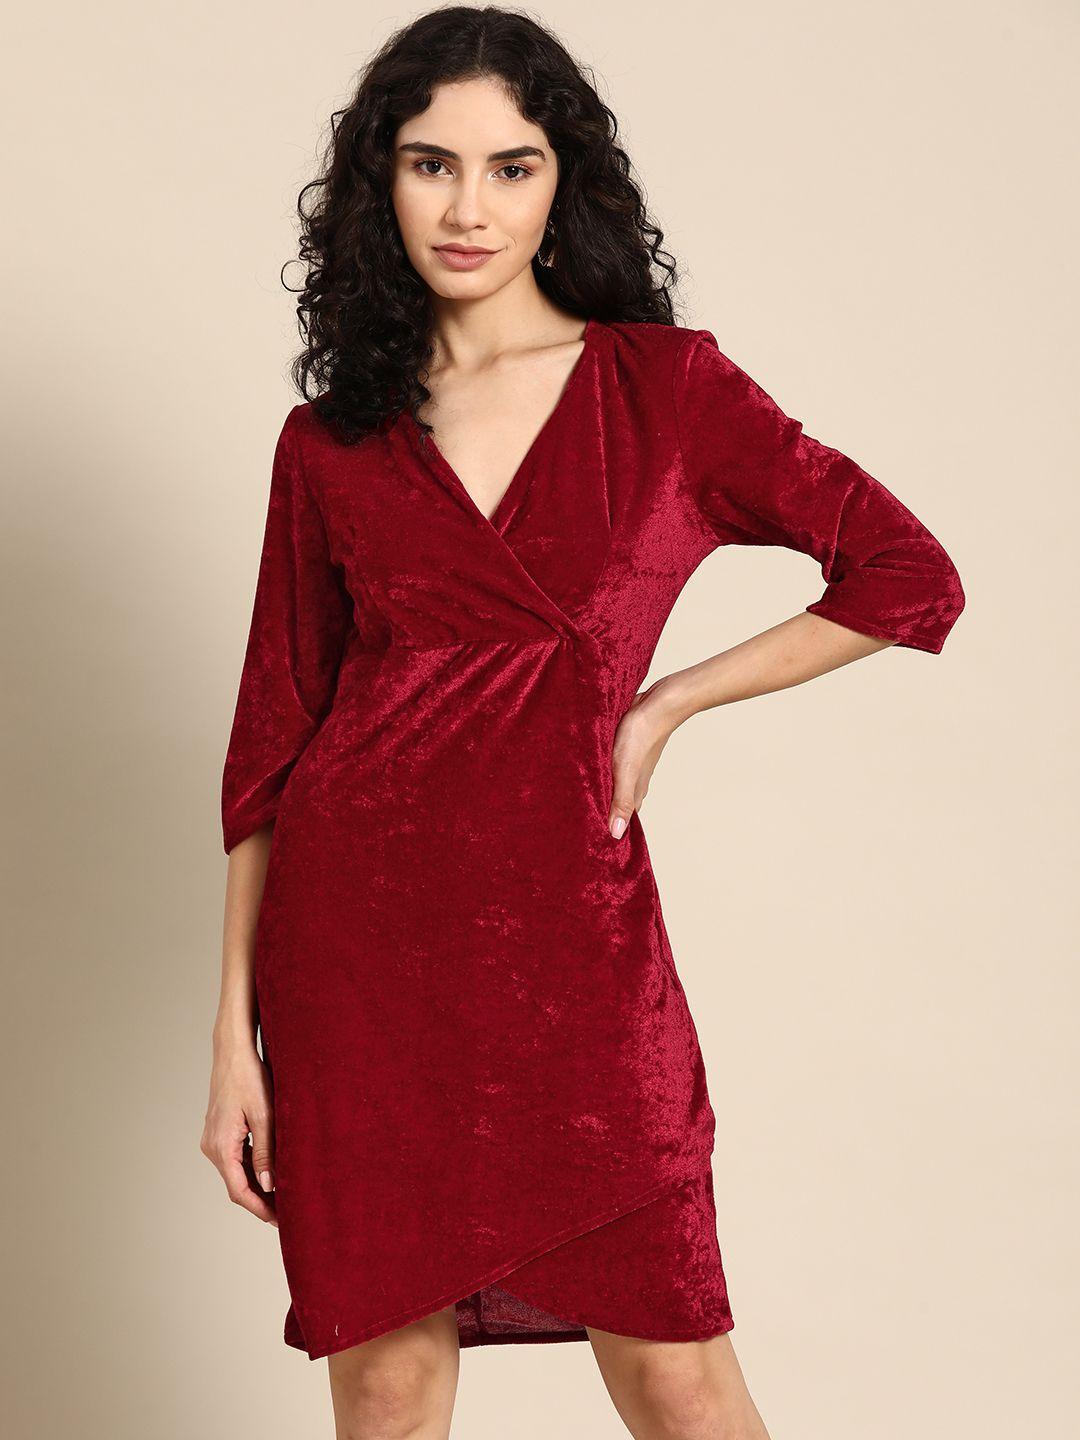 dodo & moa red solid dress